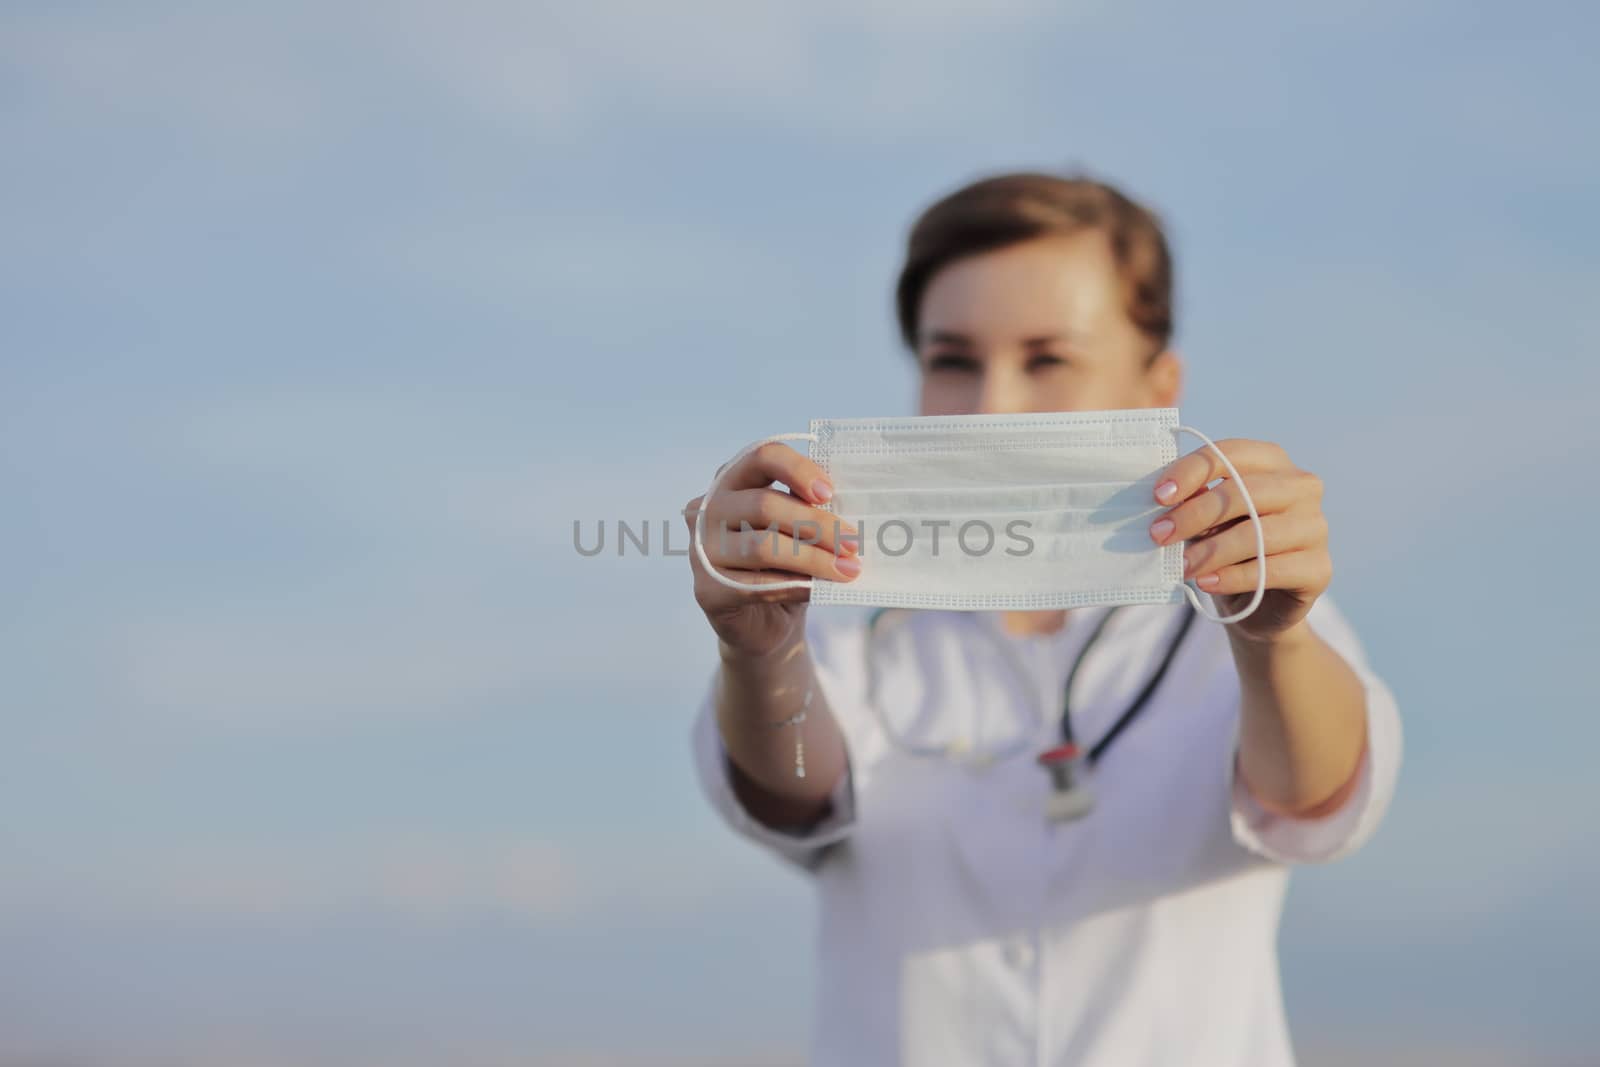 Young woman doctor or nurse showing medical face mask close up. Blue sky with clouds. Prevention Covid-19 healthcare concept. Stethoscope over the neck. Female, girl.